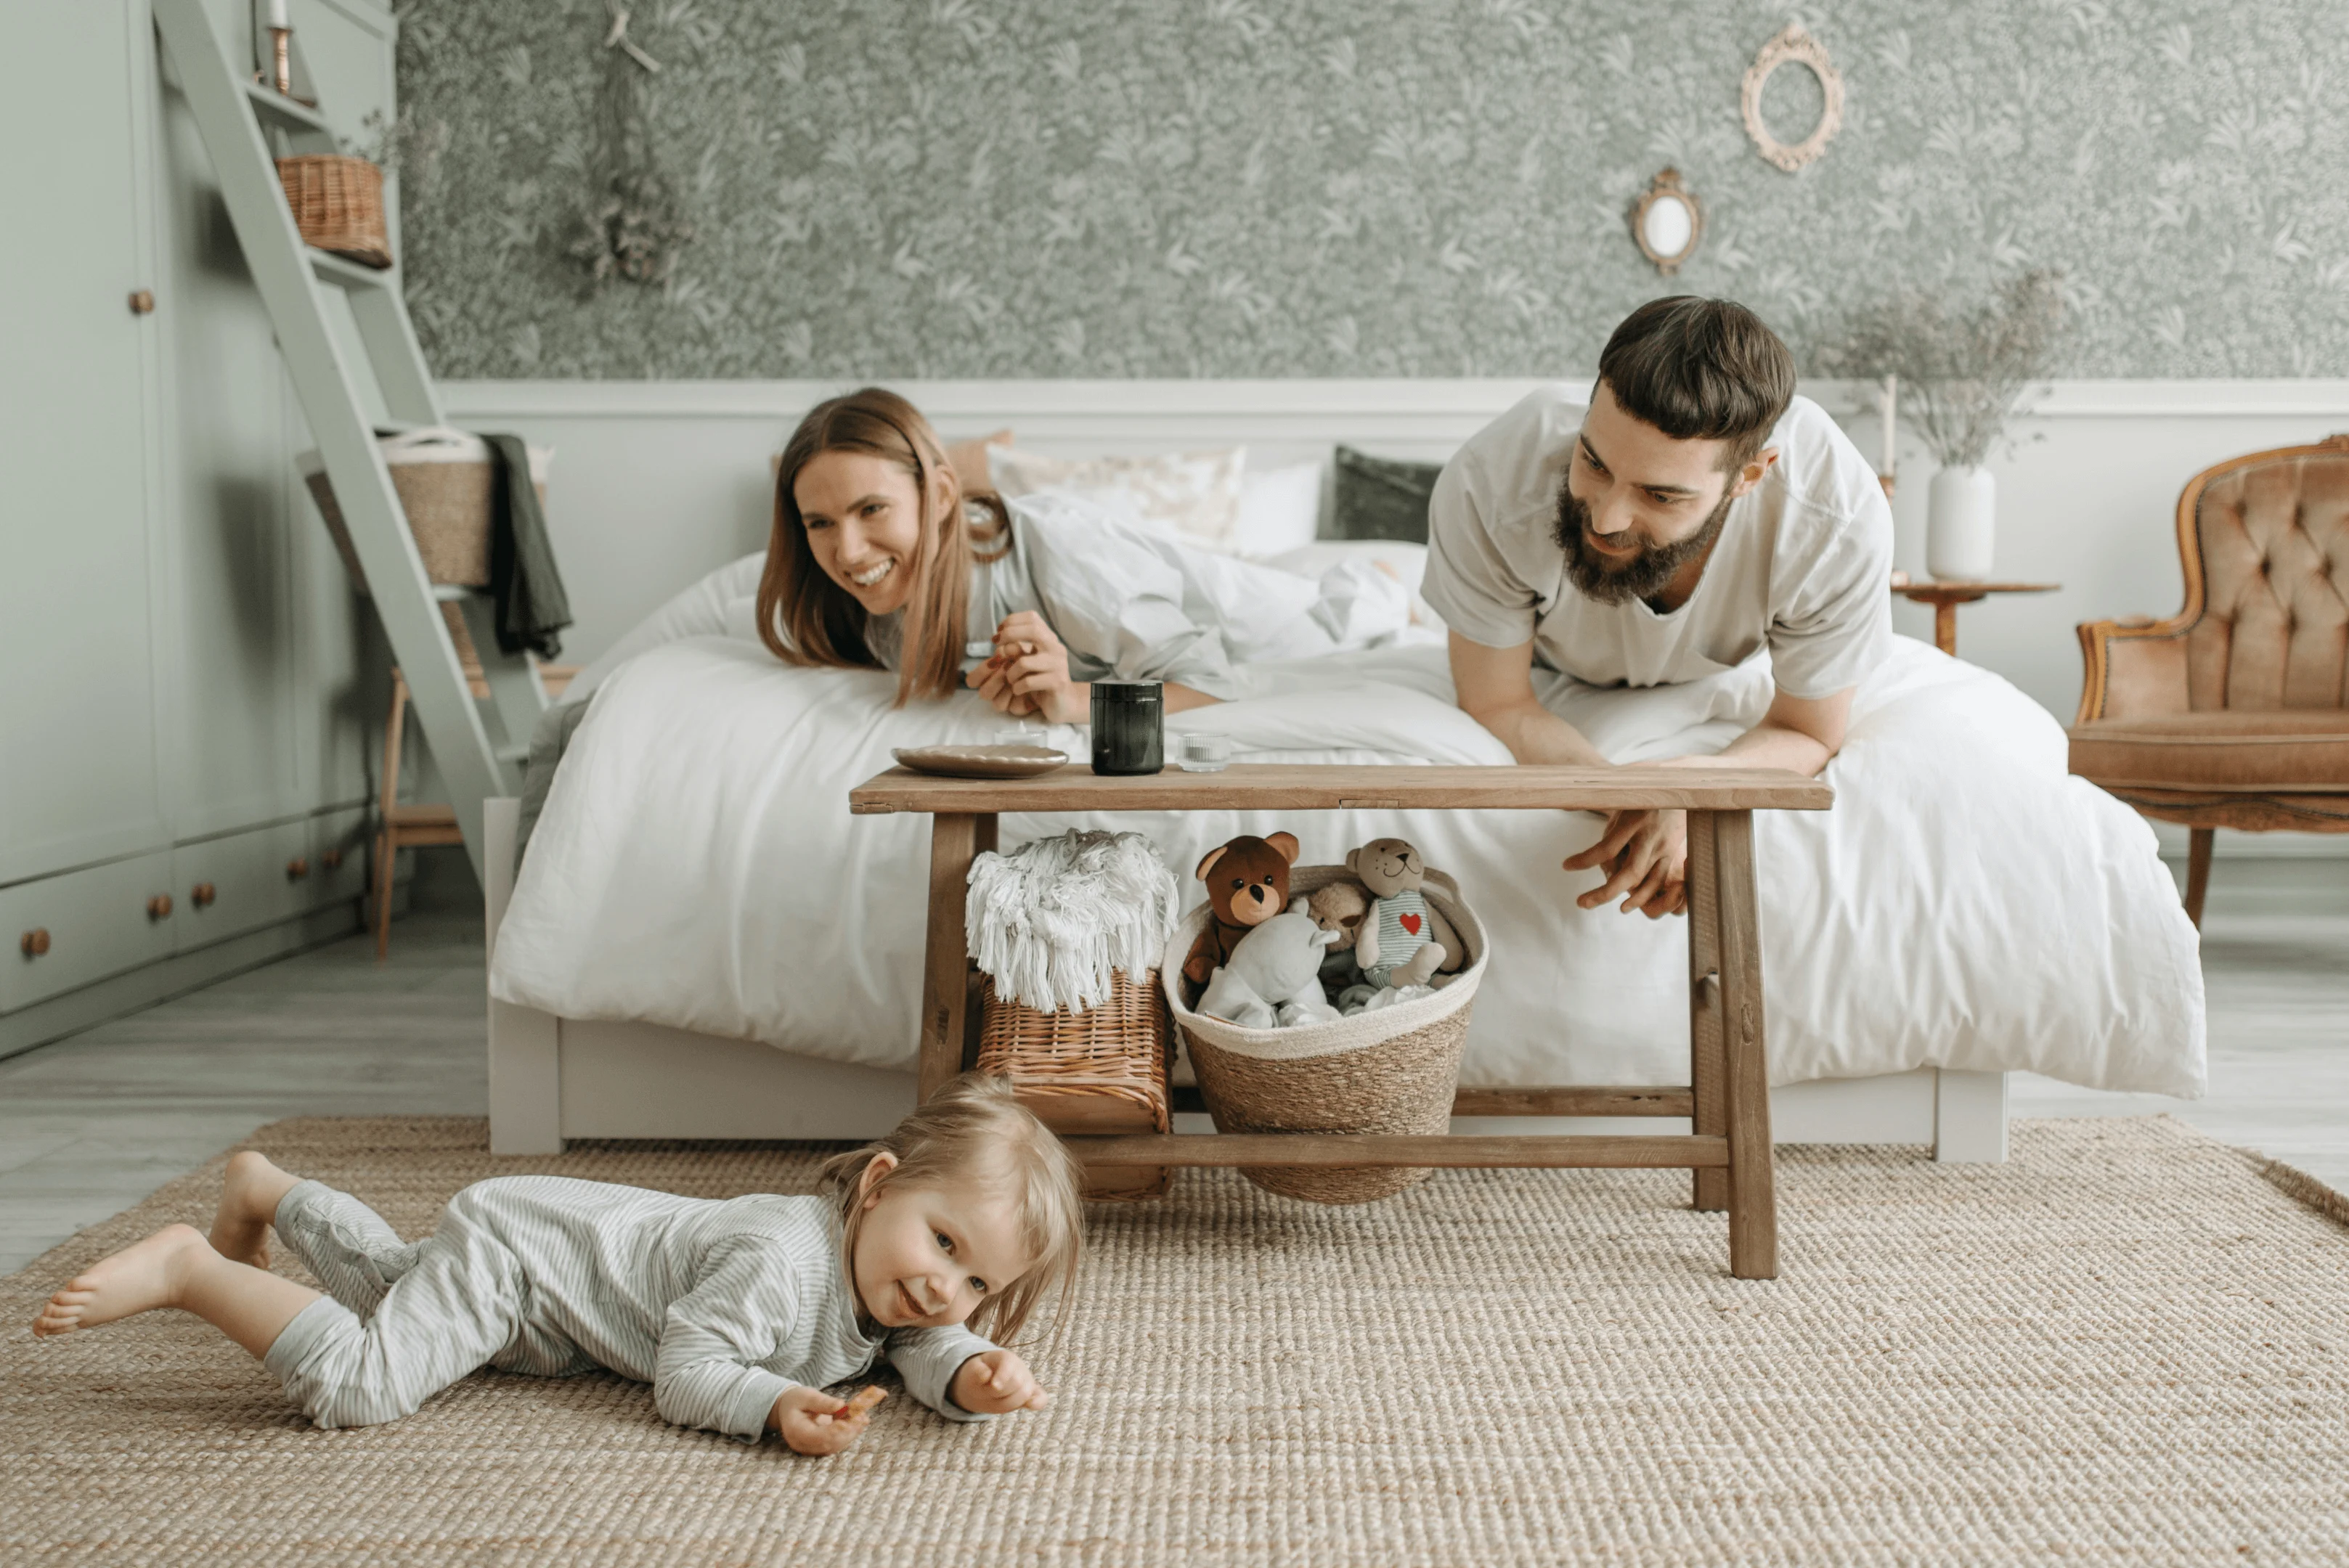 A Couple Lying on the Bed while Looking at Their Daughter Crawling on the Floor